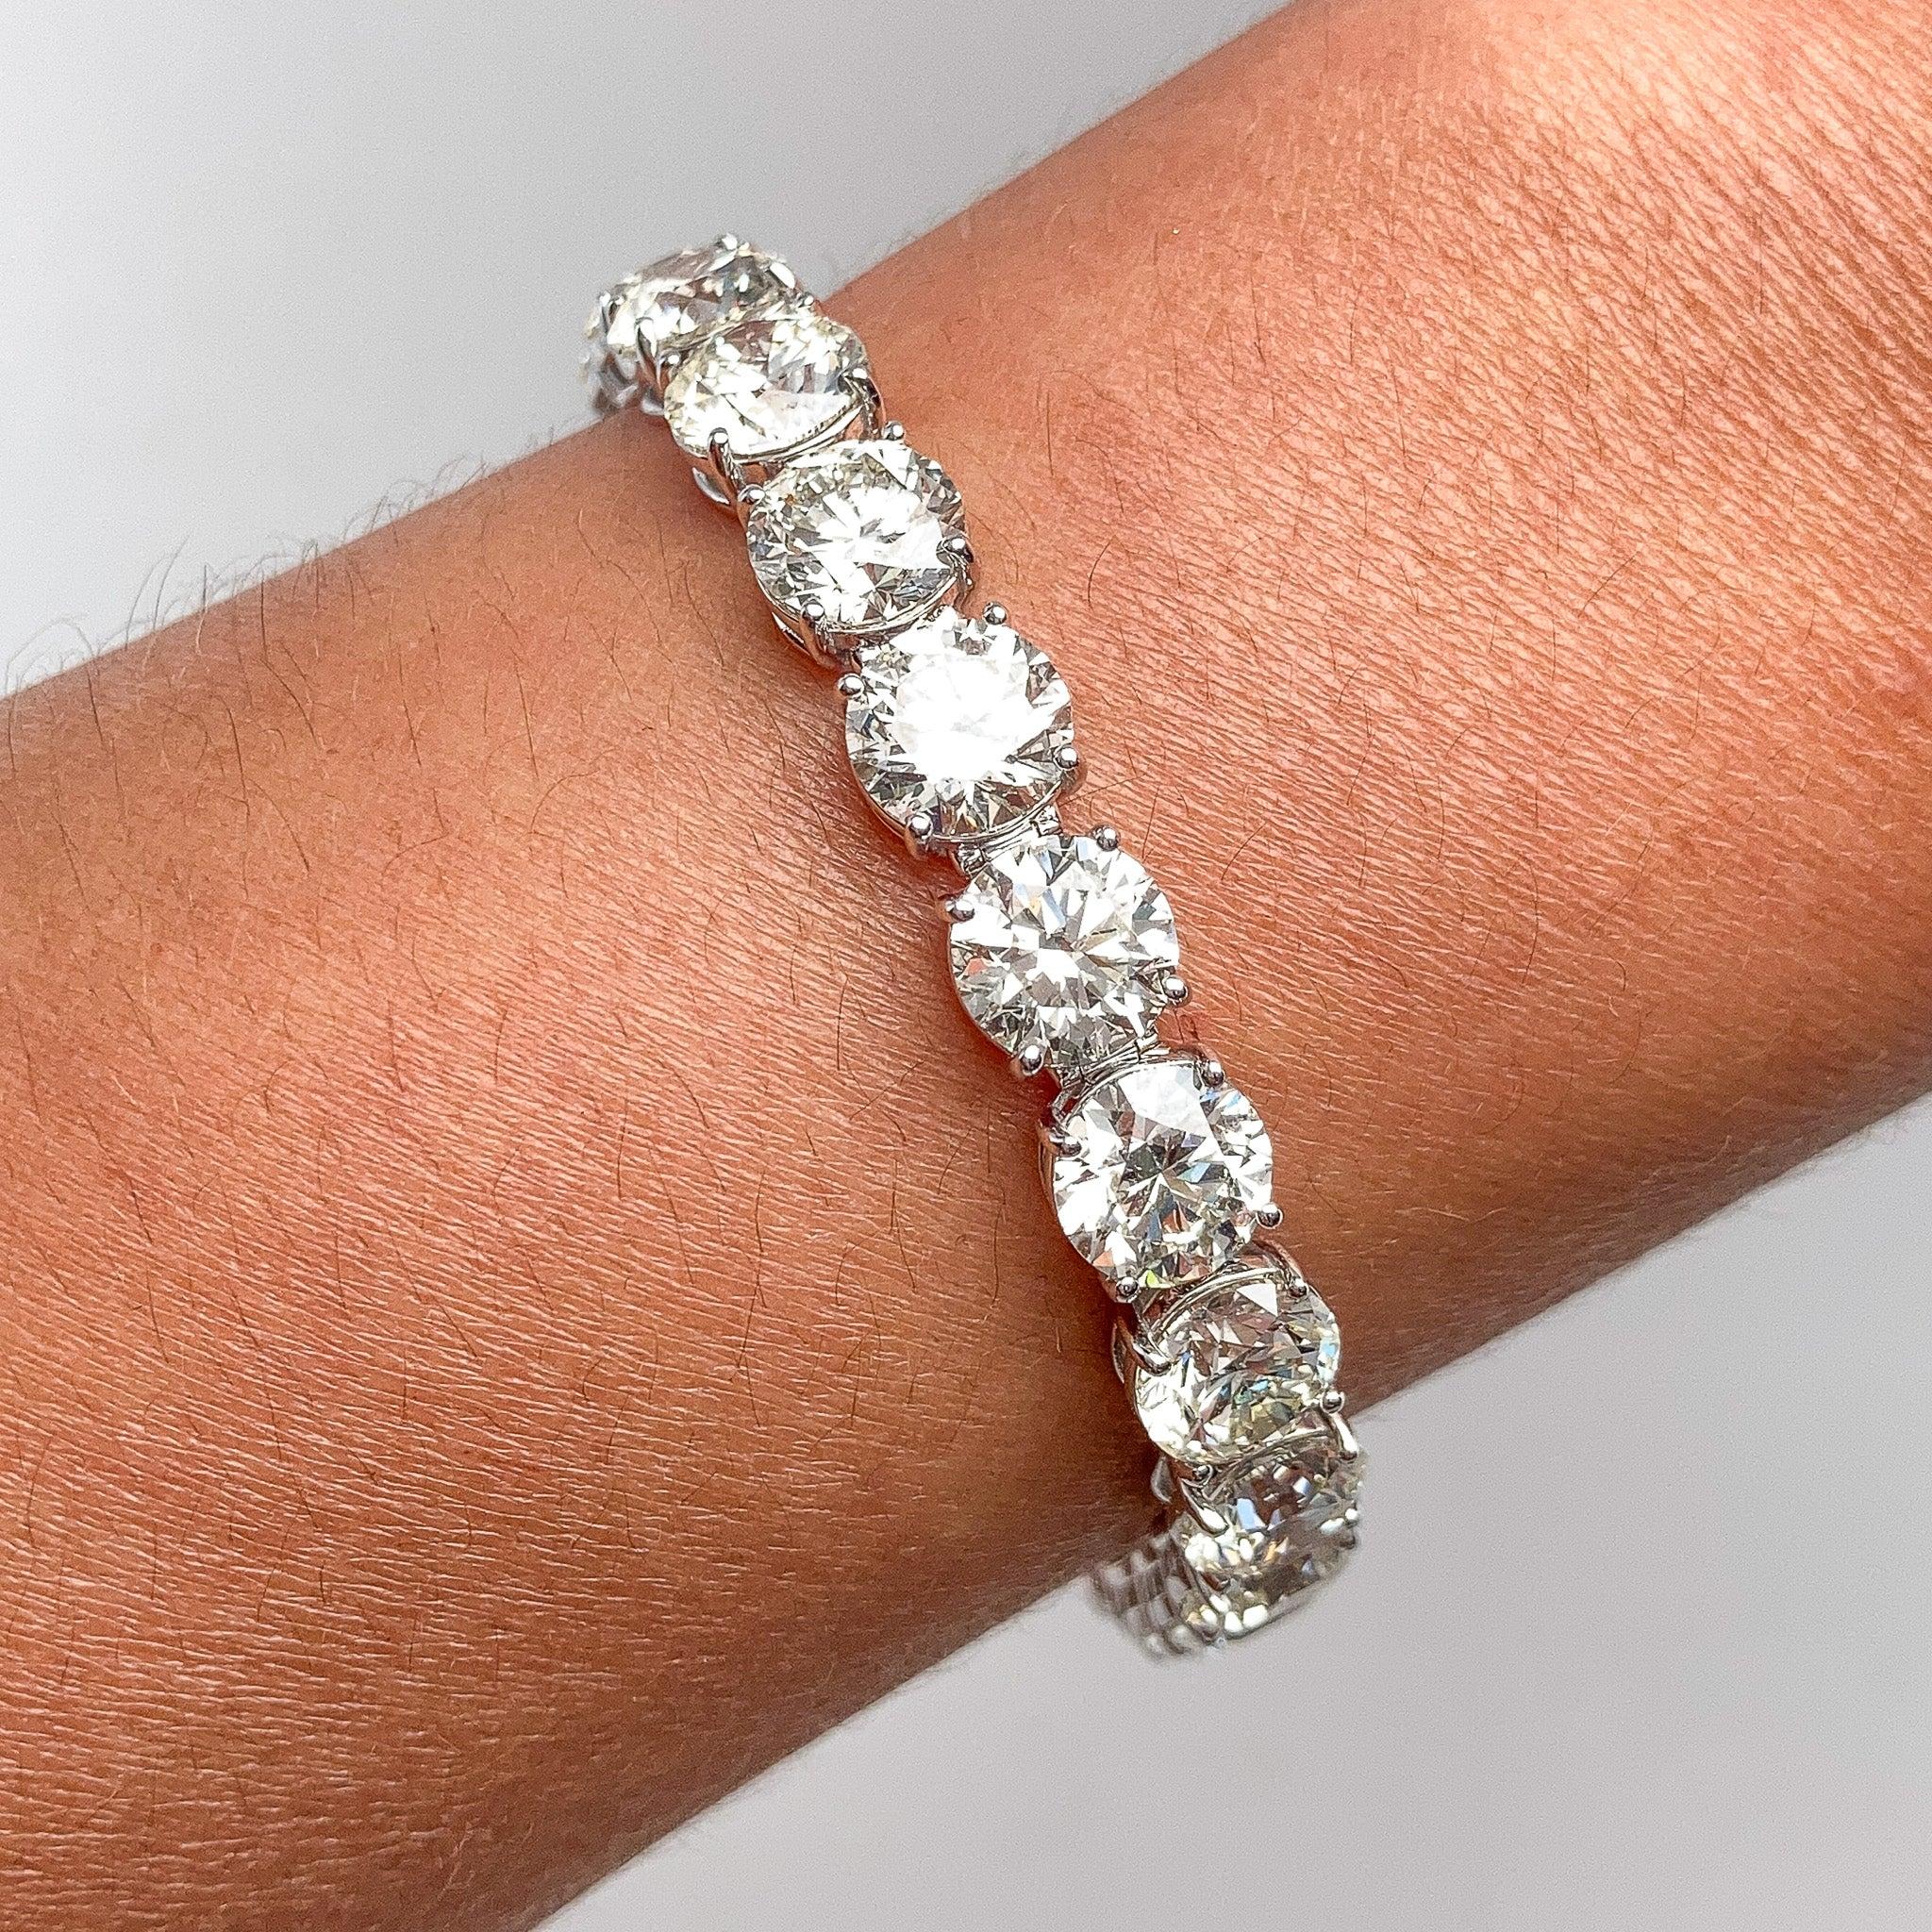 Behold this exquisite 18KT tennis bracelet, adorned with a mesmerizing total of 34.60 carats of dazzling diamonds, each certified by GIA and boasting a size exceeding 1.50 carats. This stunning piece exhibits near-colorless  brilliance and